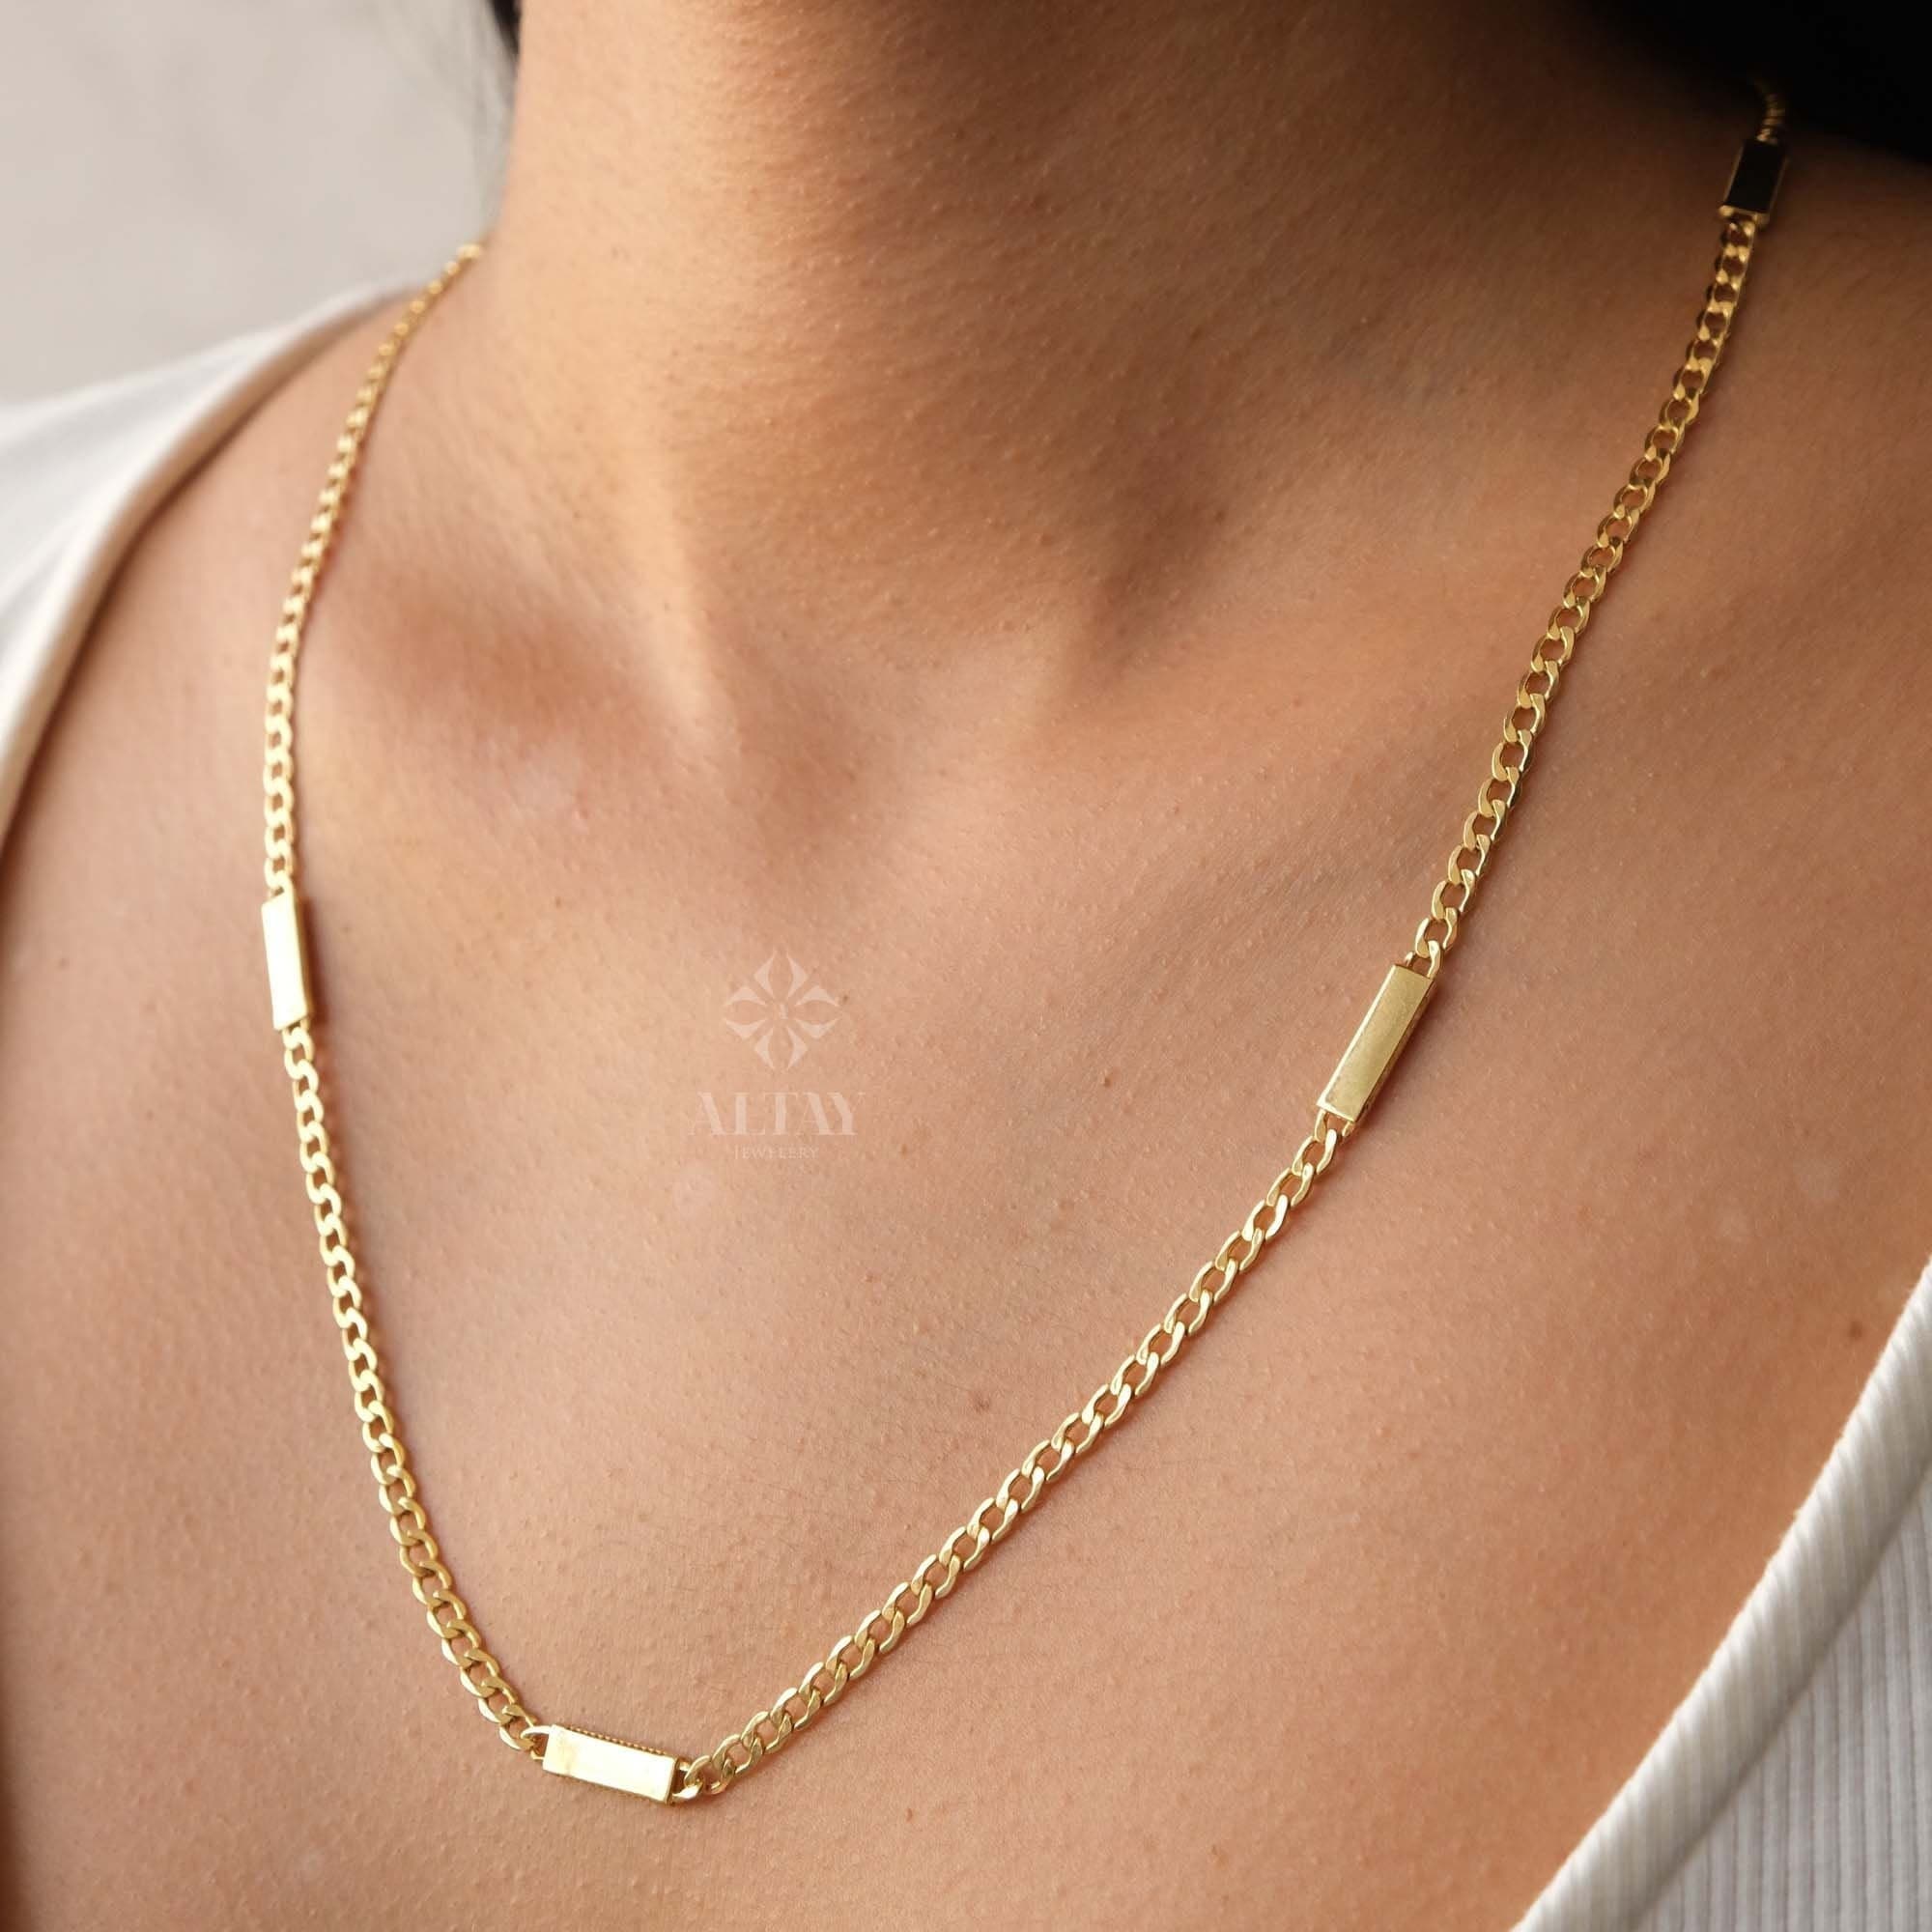 14K Gold Cuban Link Necklace, Dainty Bar Necklace, Curb Chunky Engraved Necklace, Skinny Bar Necklace, Stacking Necklace, Men Women Chain